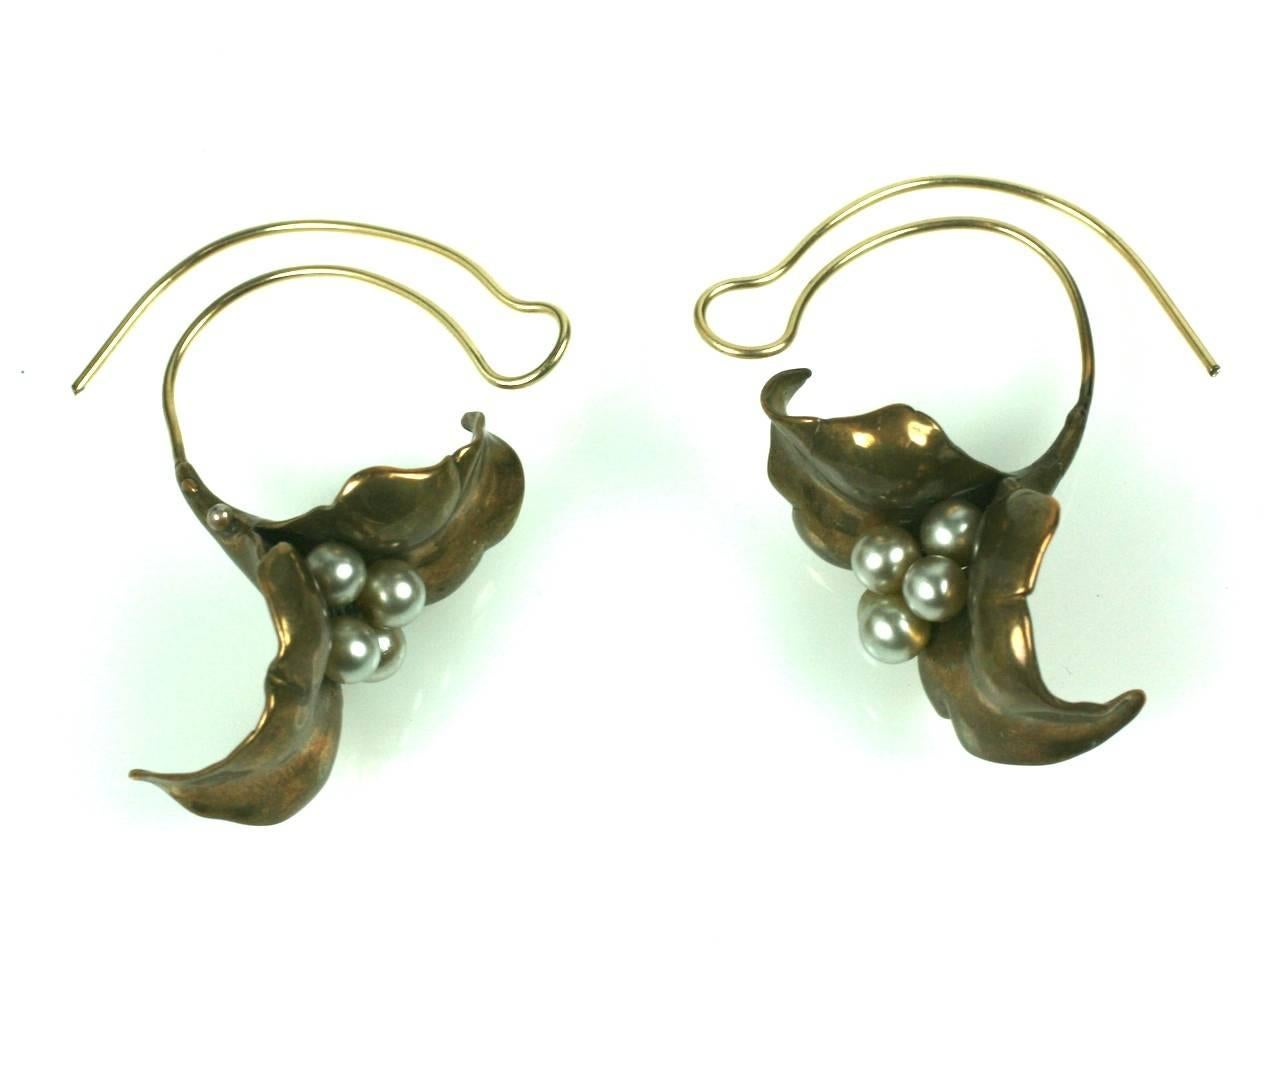 Unusual Artisan Cala Lily Earrings with faux glass pearls. The flowers hang low below the lobes and the ear wires are quite unusual as they mimic the curve of the flower stem. Handmade in brass and extremely graphic in form. Flower head measures